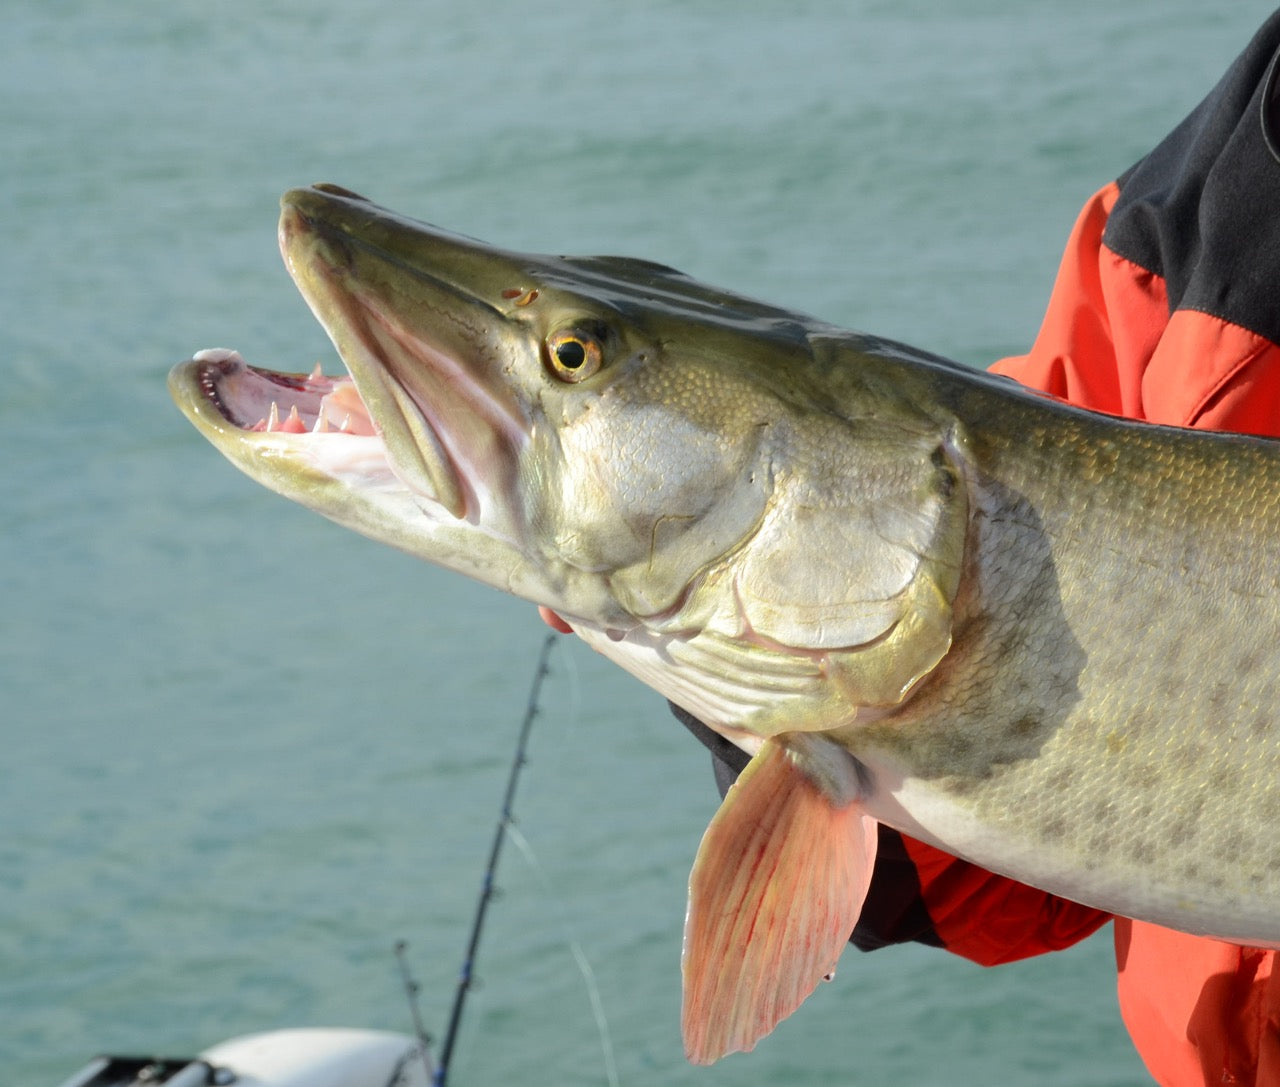 Opening day fish. - Musky, Tiger Musky & Pike (ESOX) - Lake Ontario United  - Lake Ontario's Largest Fishing & Hunting Community - New York and Ontario  Canada